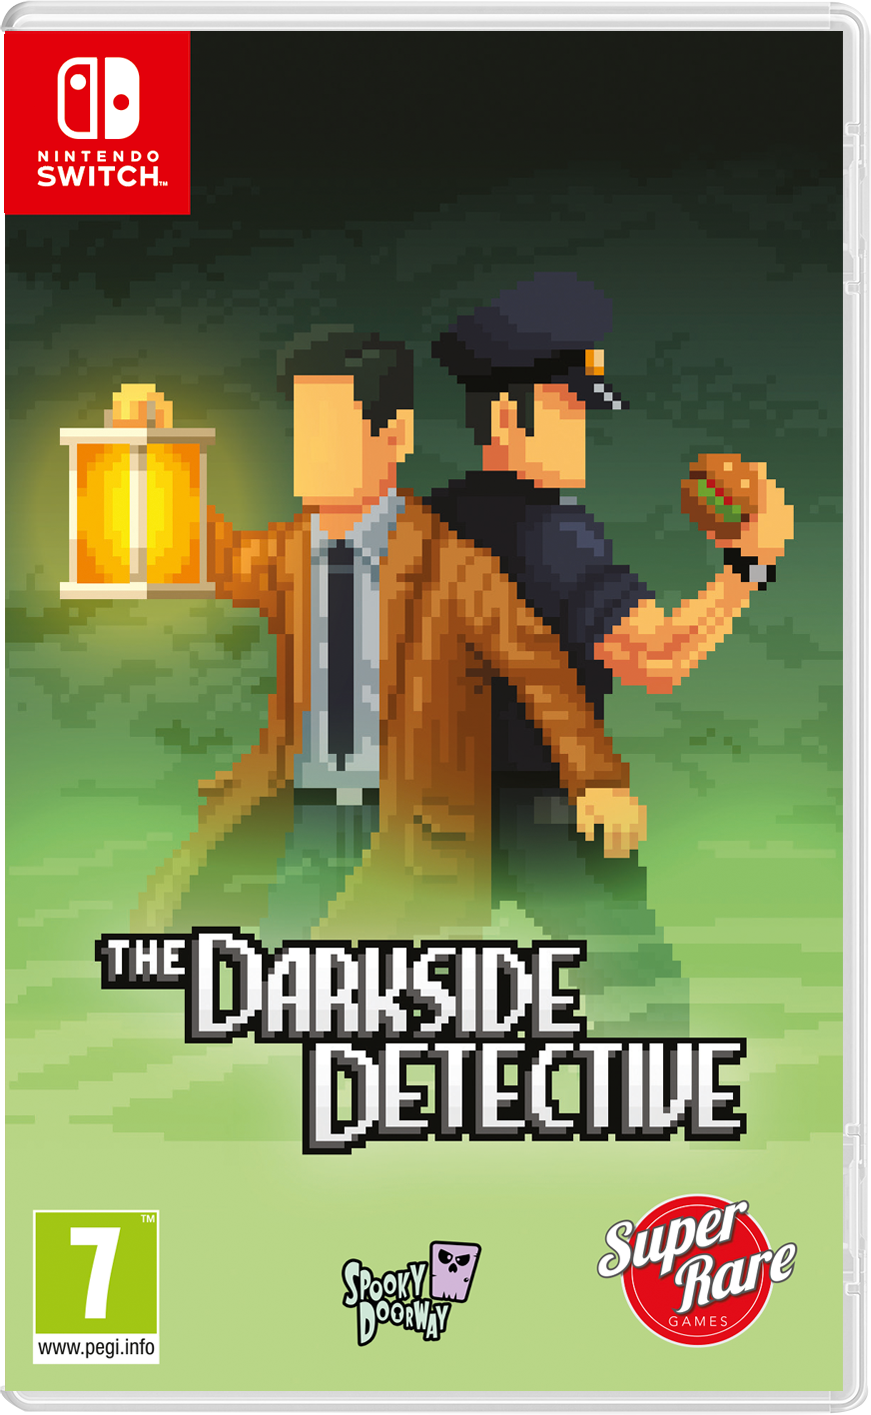 SRG#21: The Darkside Detective (Switch)